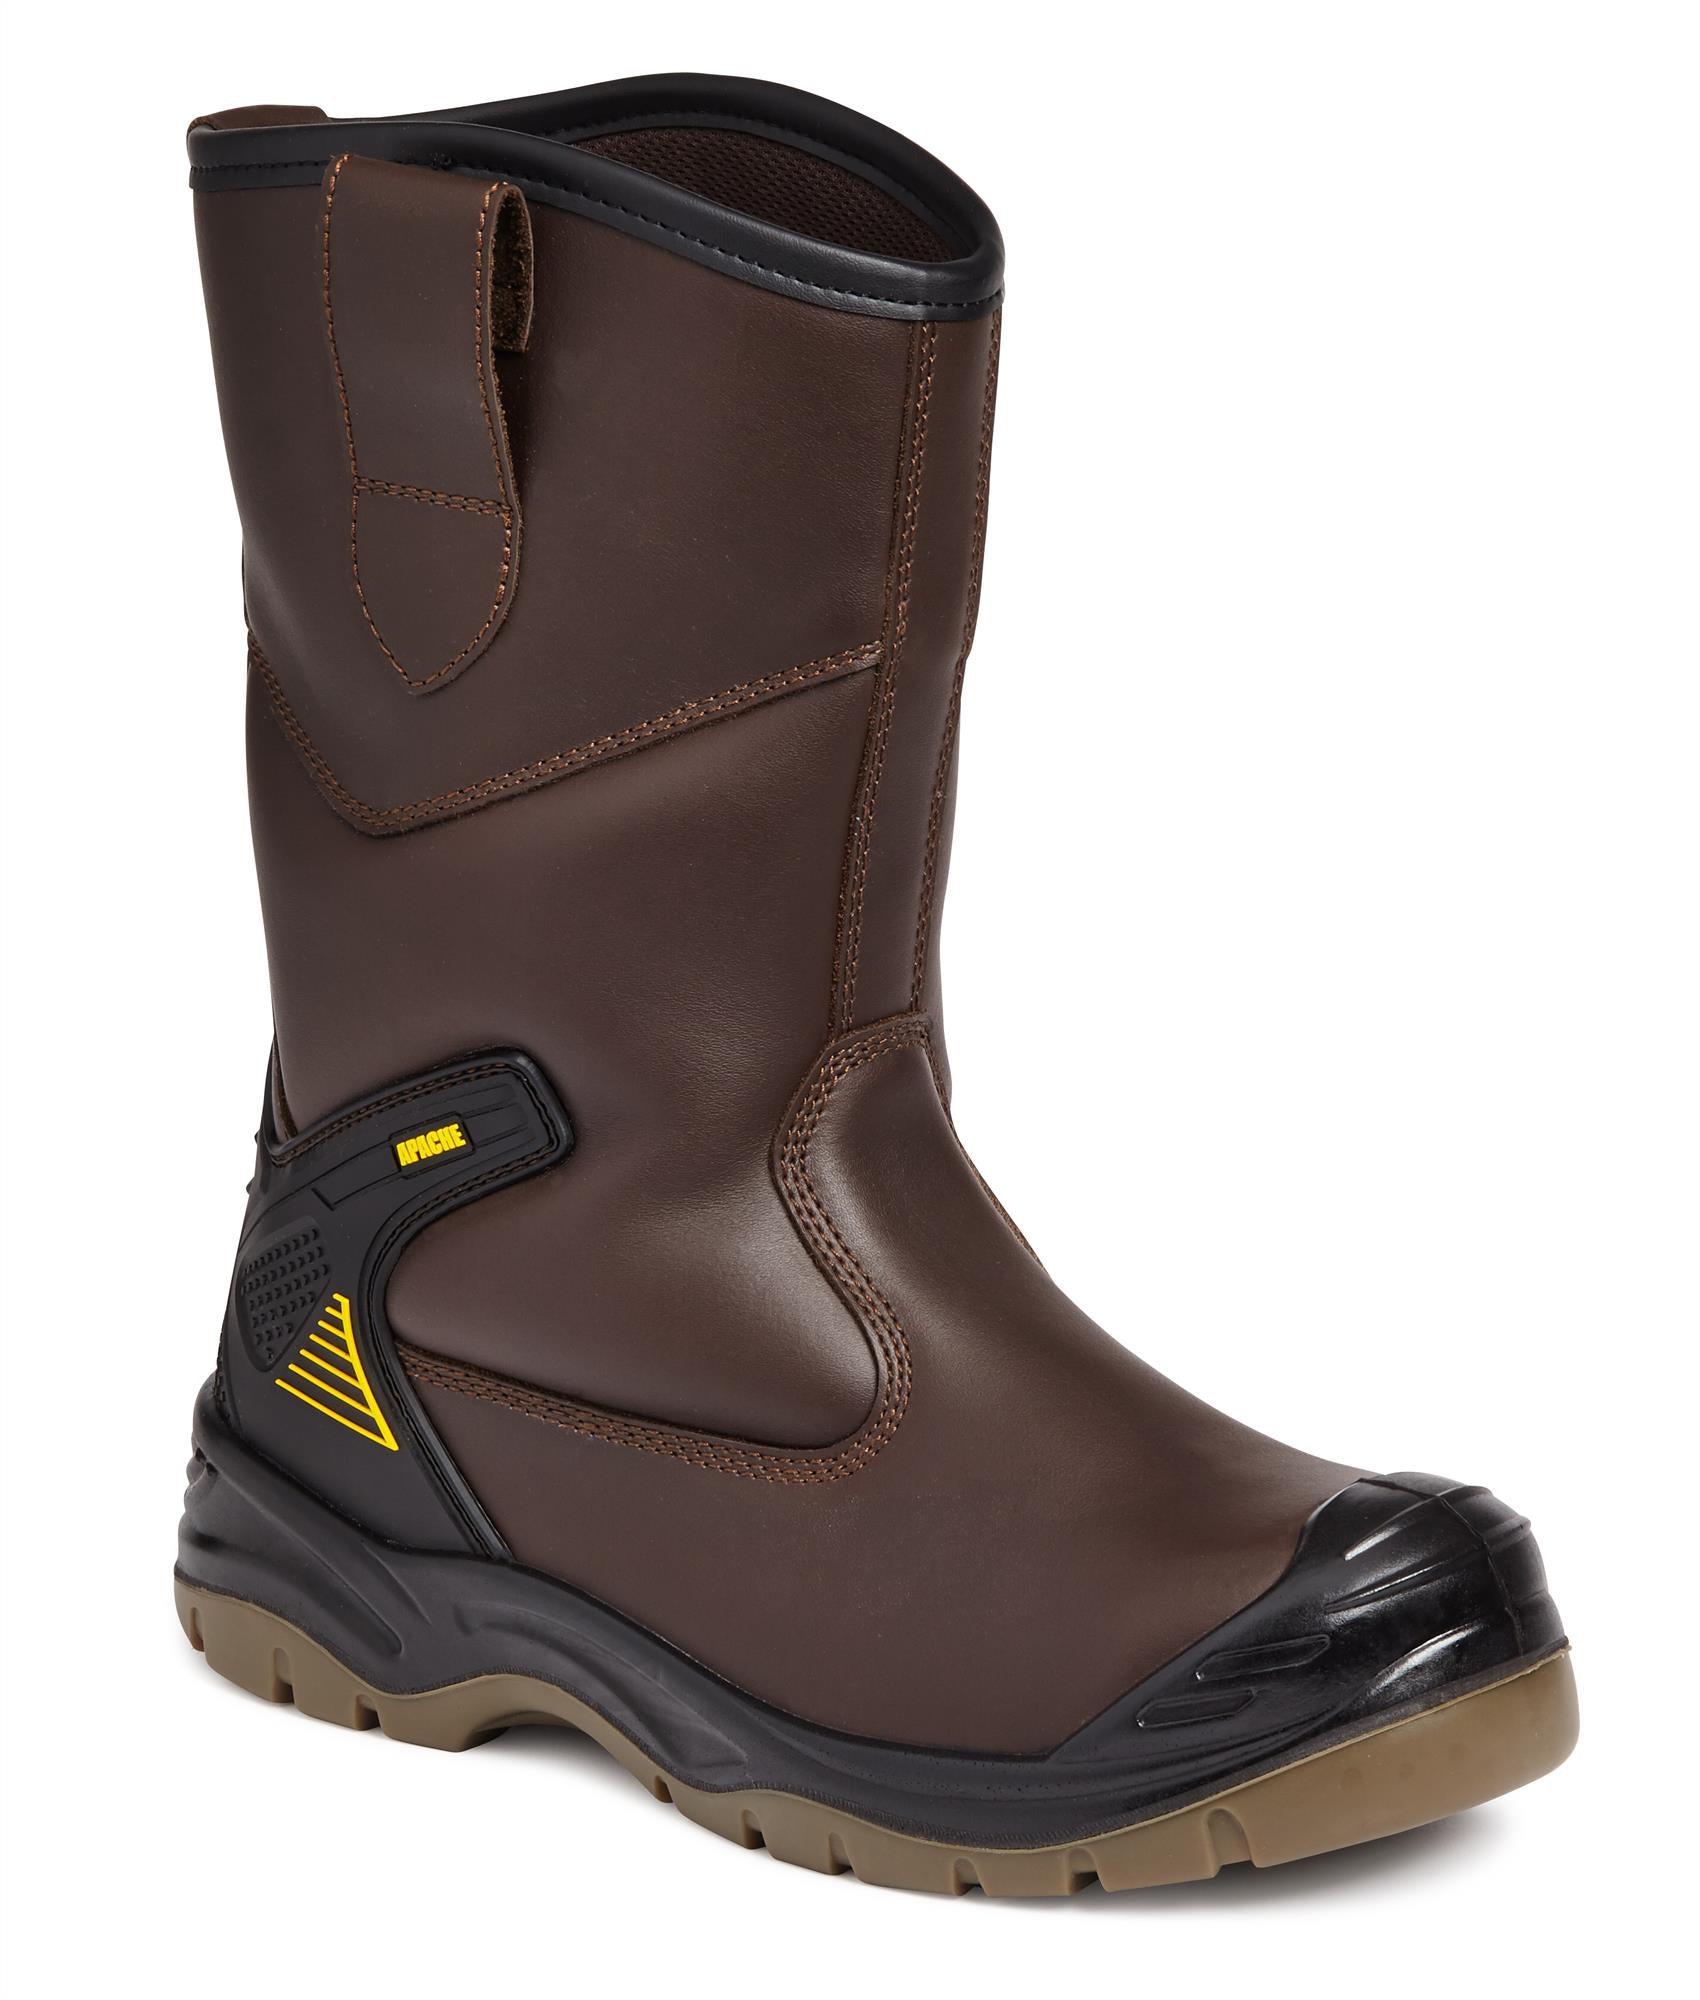 Apache S3 brown leather waterproof steel toe/midsole safety rigger work boot #AP305